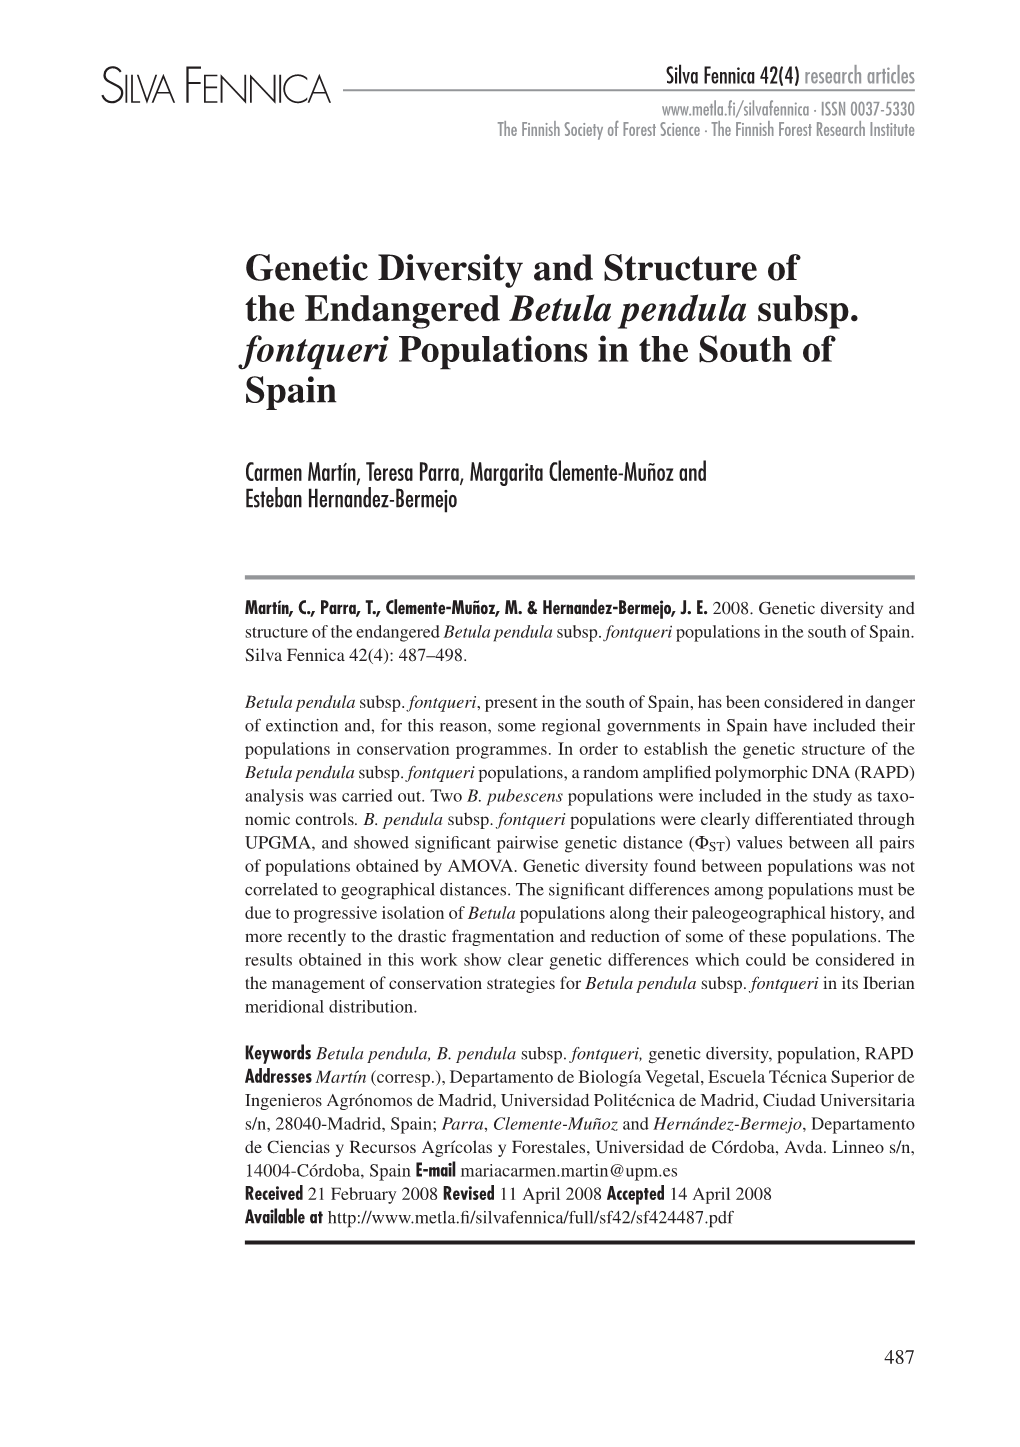 Genetic Diversity and Structure of the Endangered Betula Pendula Subsp